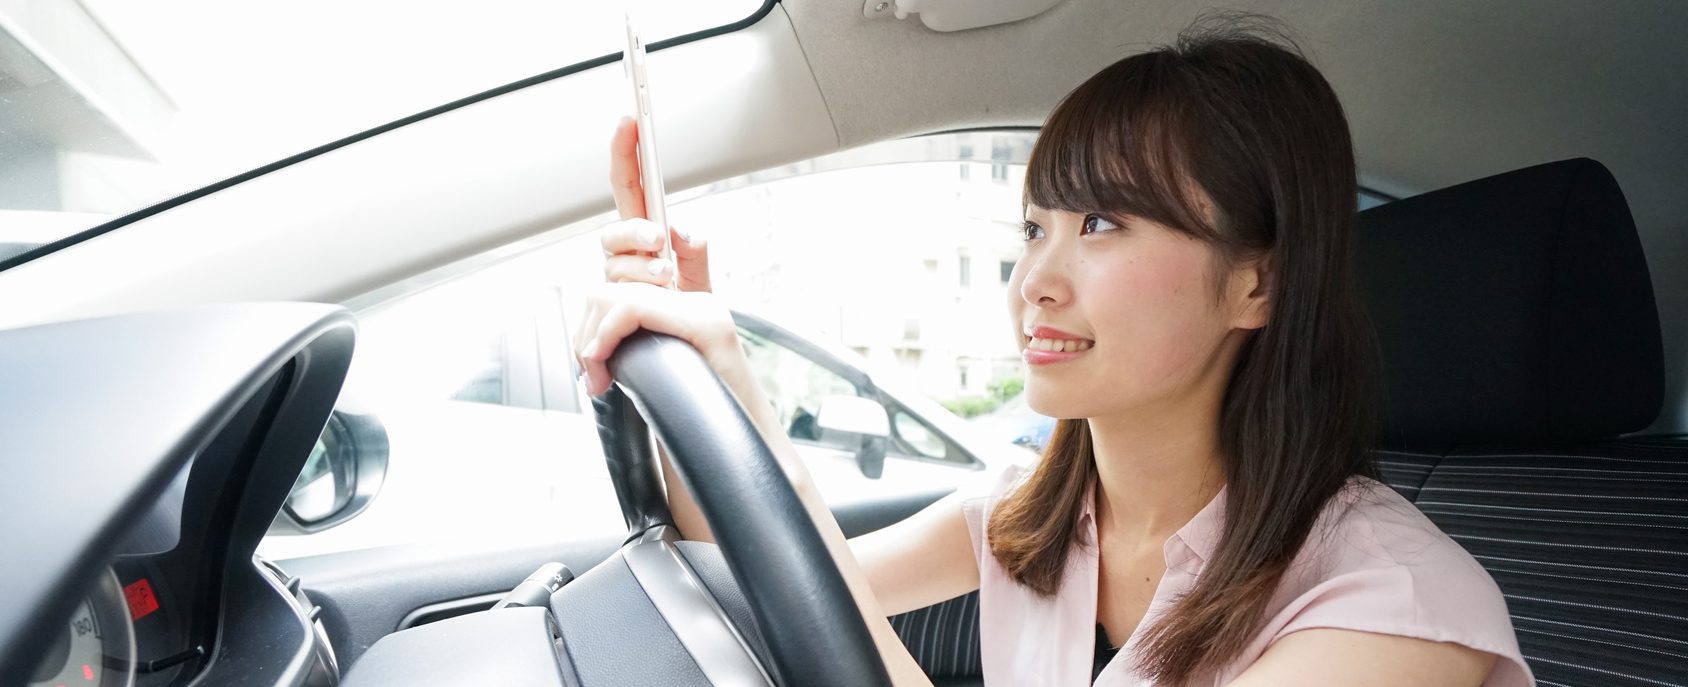 Driving woman using smartphone